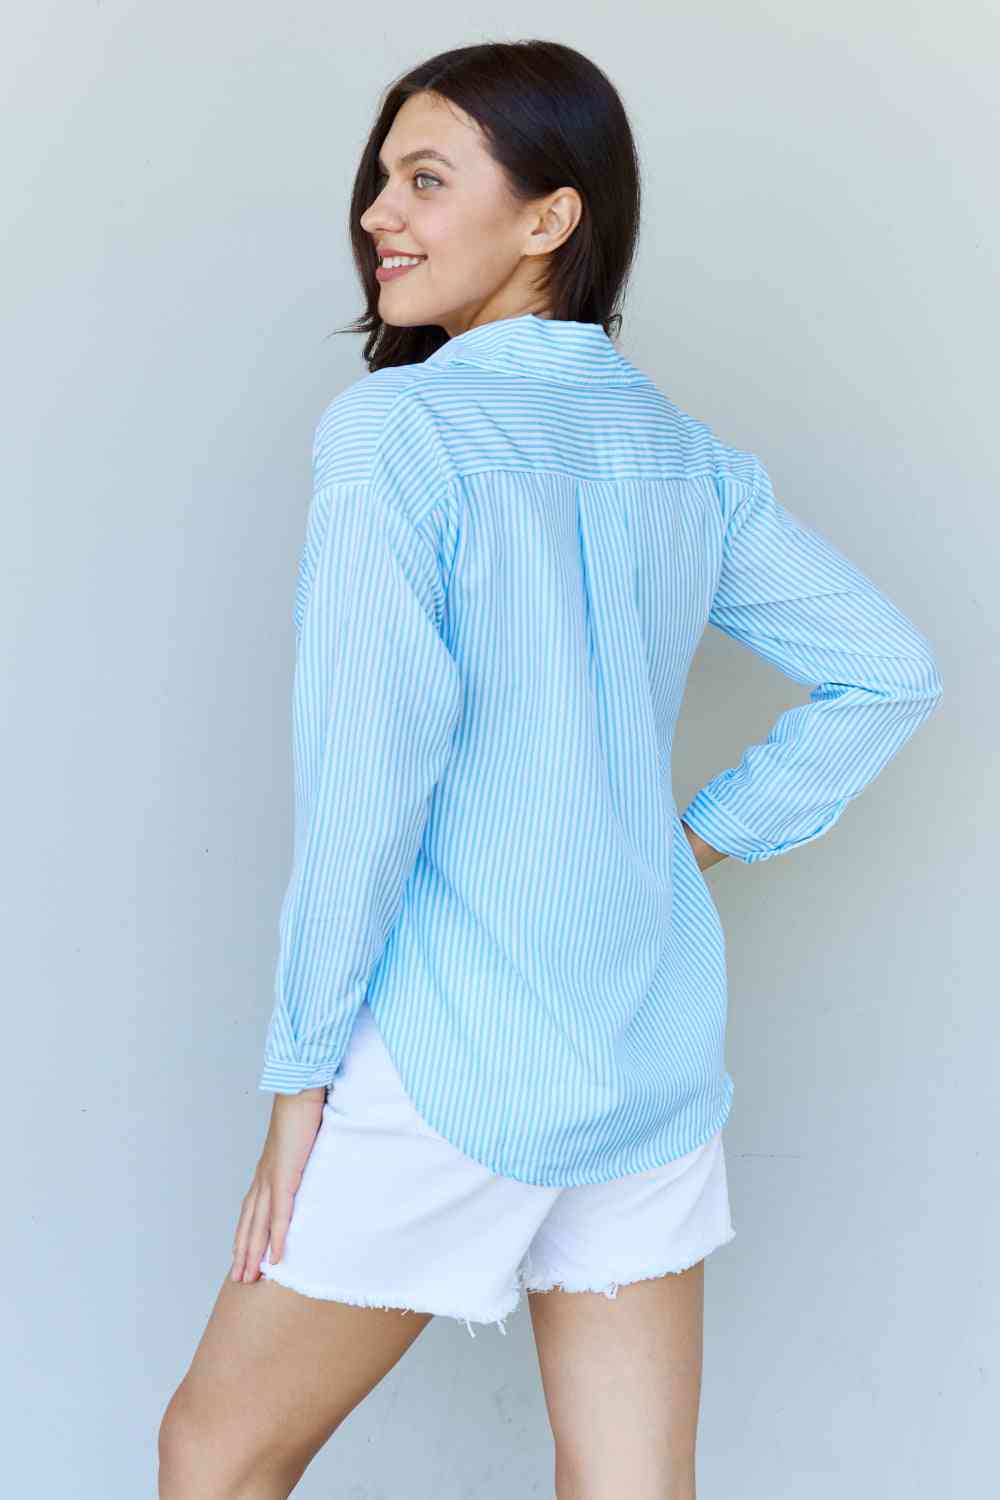 Doublju She Means Business Striped Button Down Shirt Top No 2